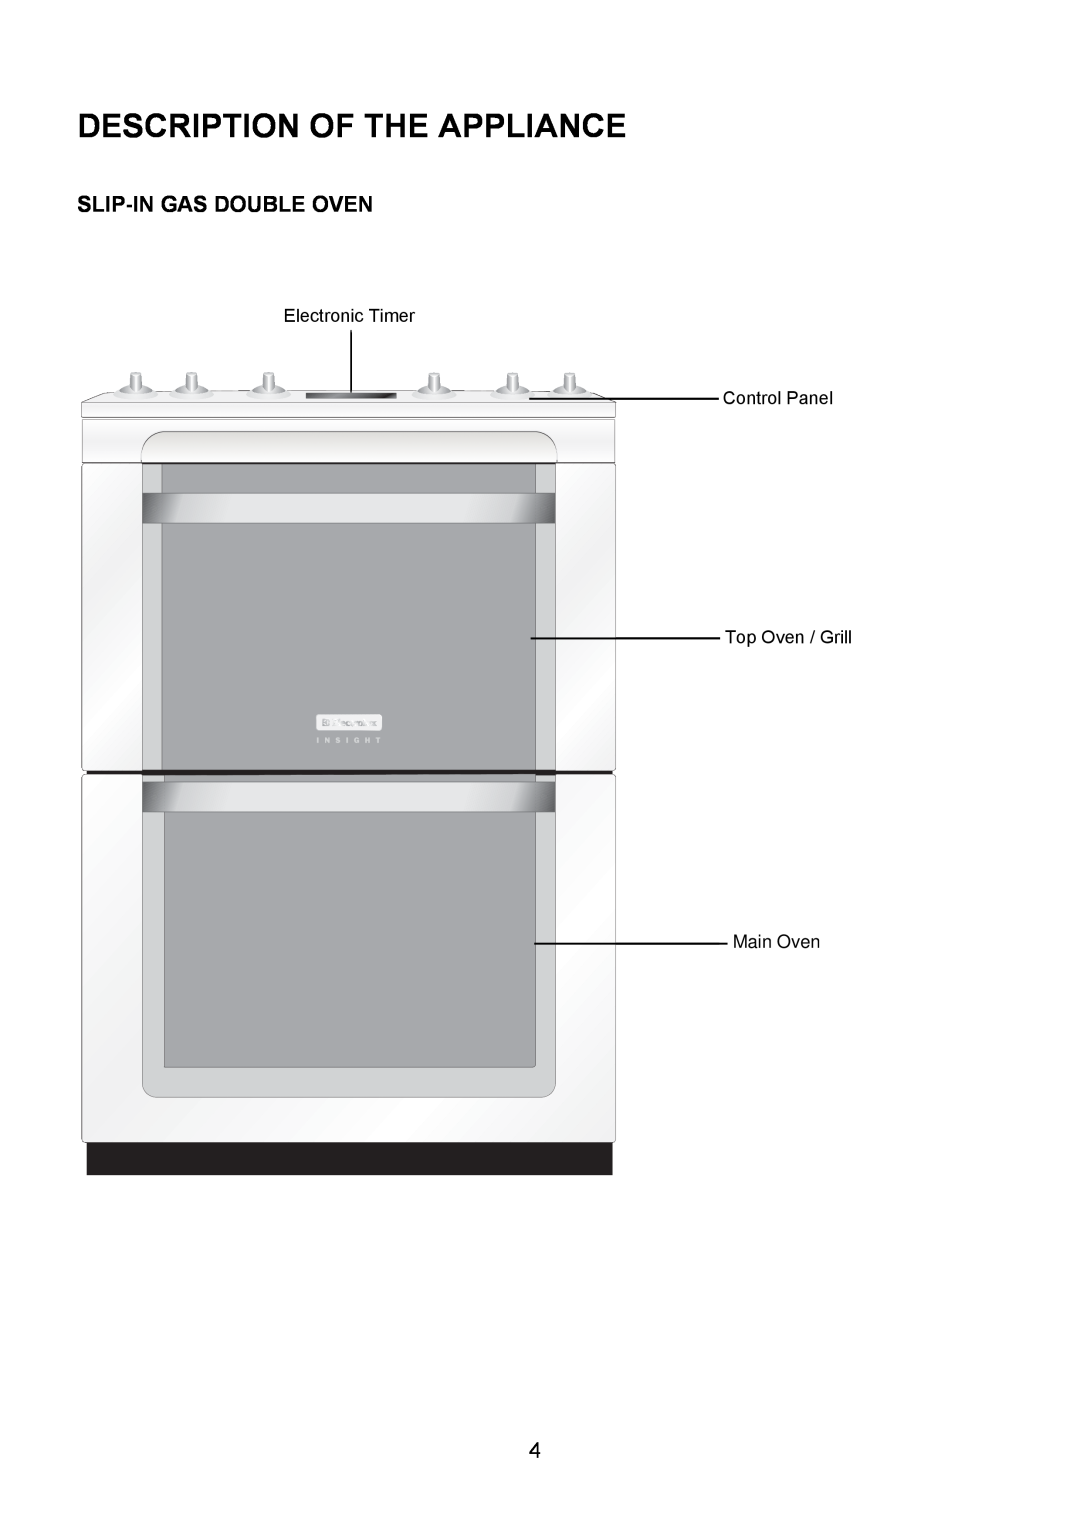 Electrolux EIKG6047, EIKG6046 user manual Description Of The Appliance, Slip-In Gas Double Oven 